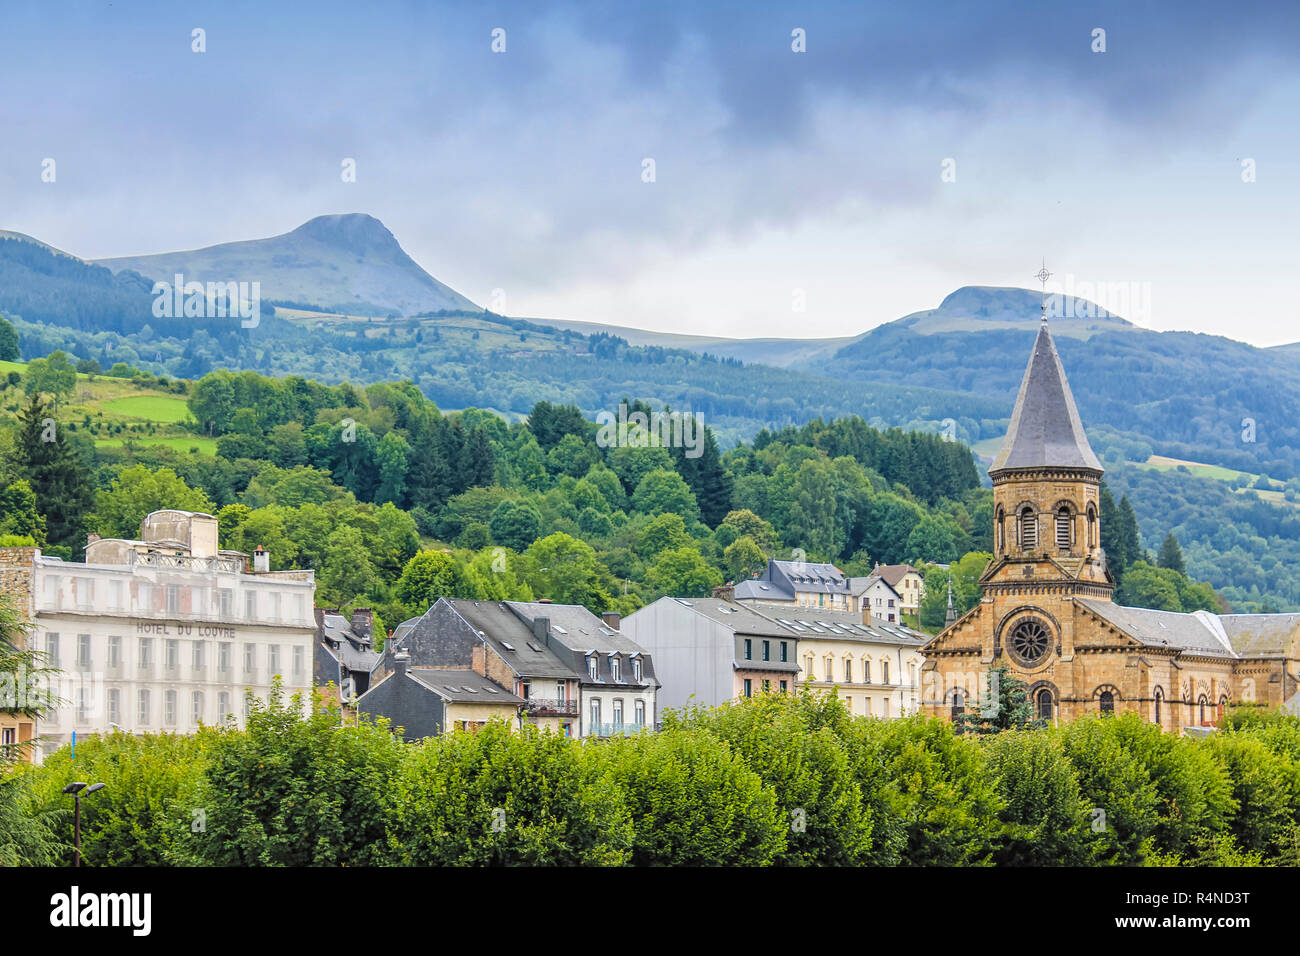 LA BOURBOULE, FRANCE - JULY 28, 2011: View over the town and volcanic surroundings of La Bourboule, Puy-de-Dome department in central France. The town Stock Photo